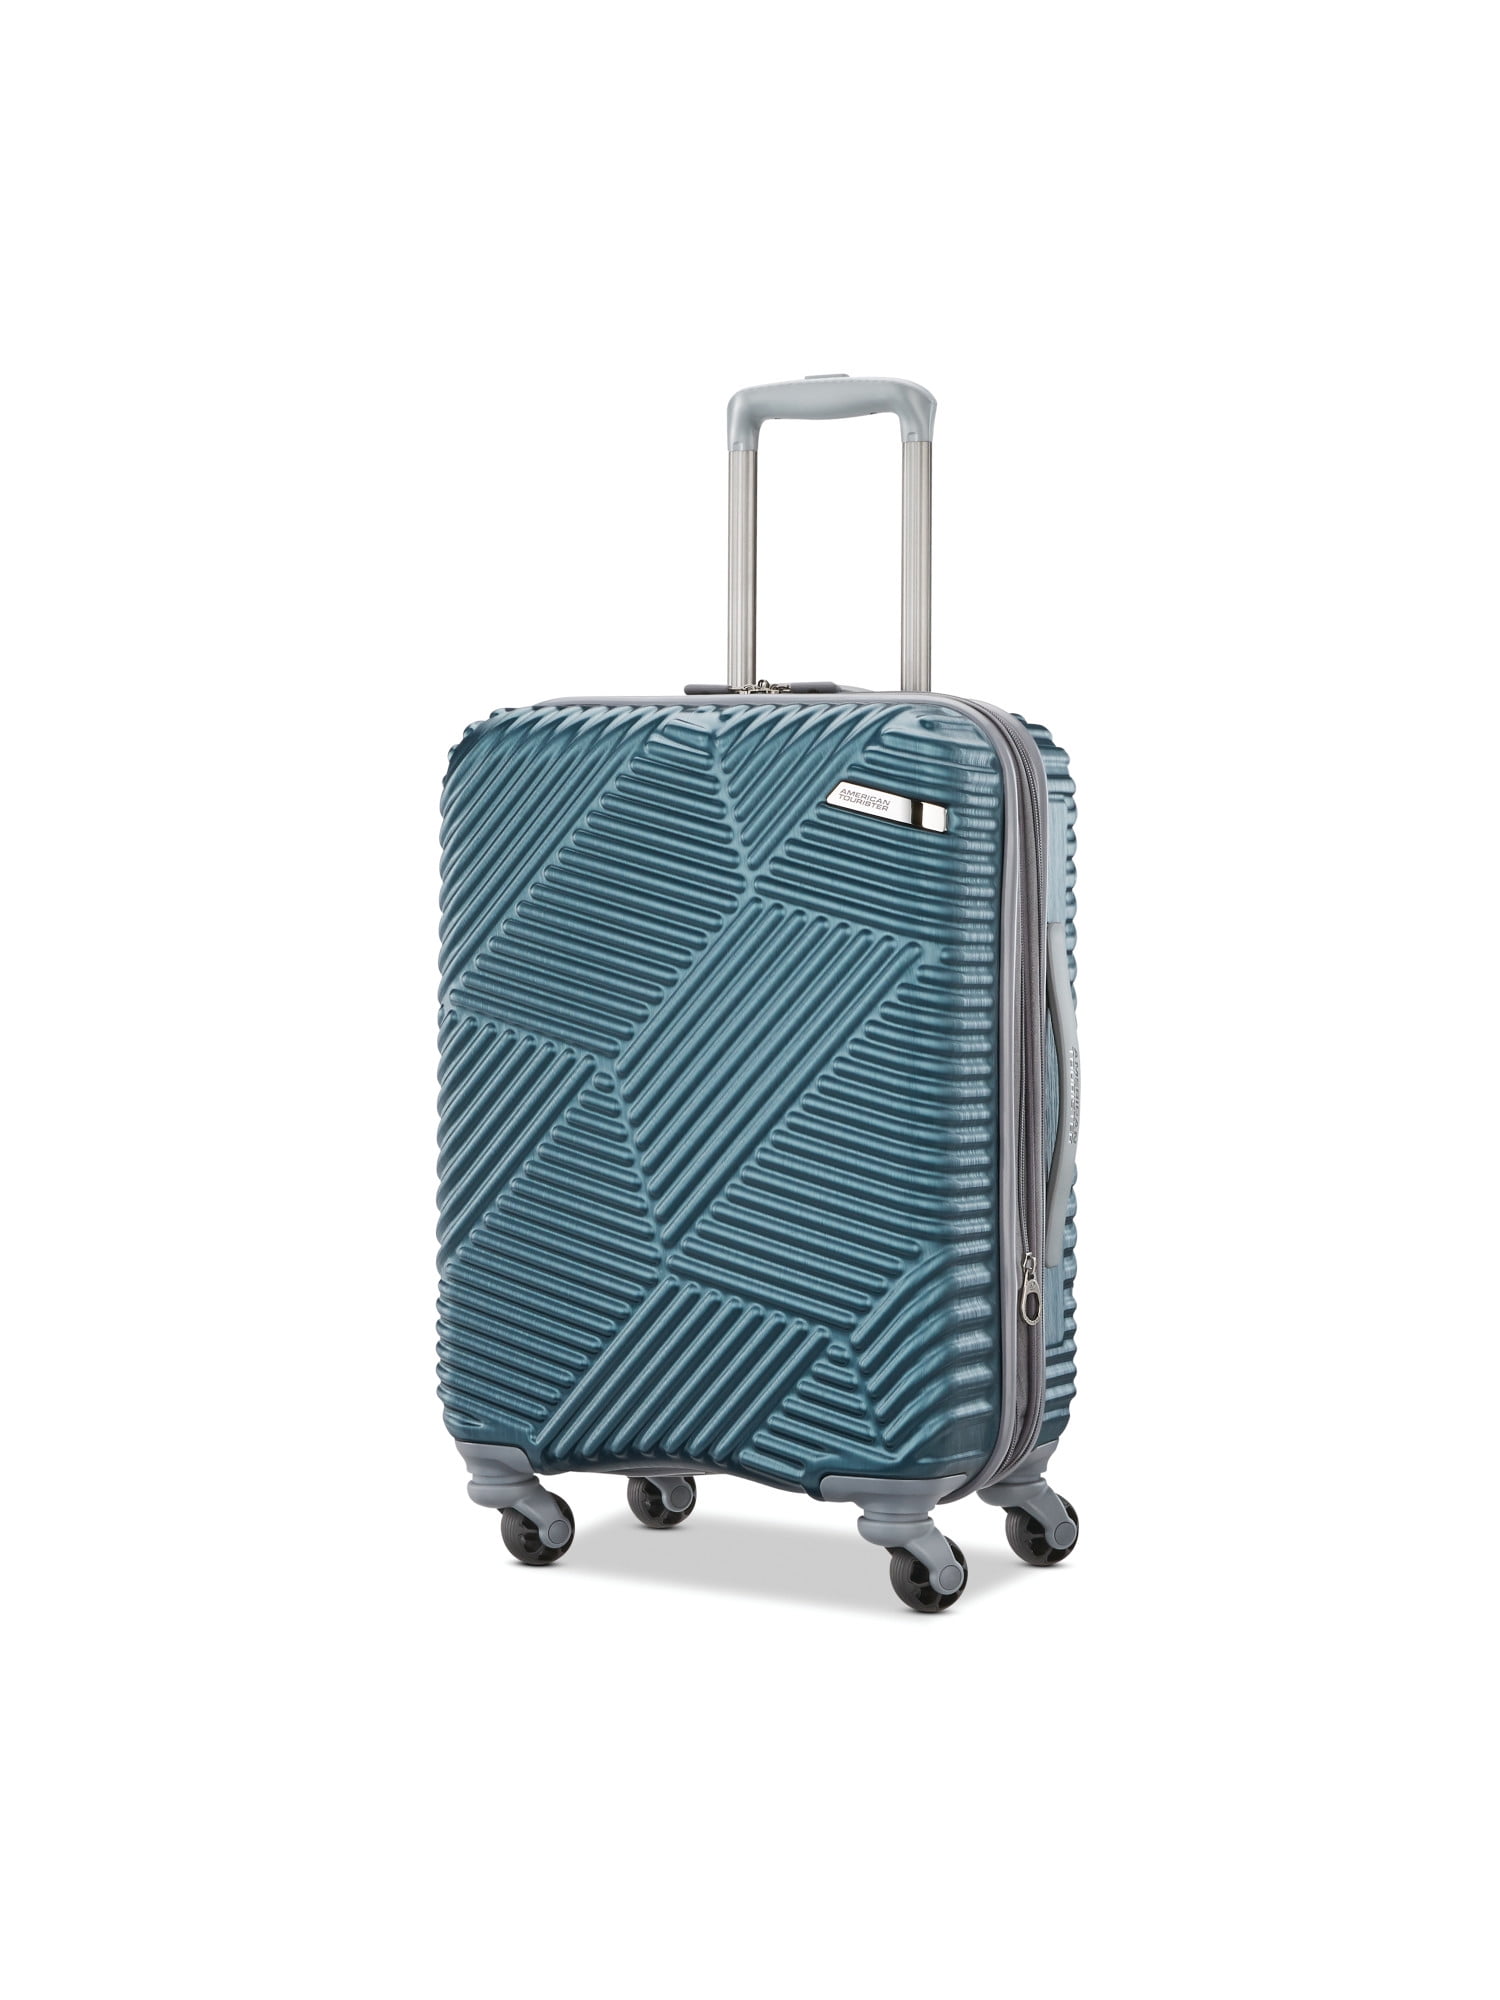 American Tourister 20-Inch Carry-On Luggage, One Piece -